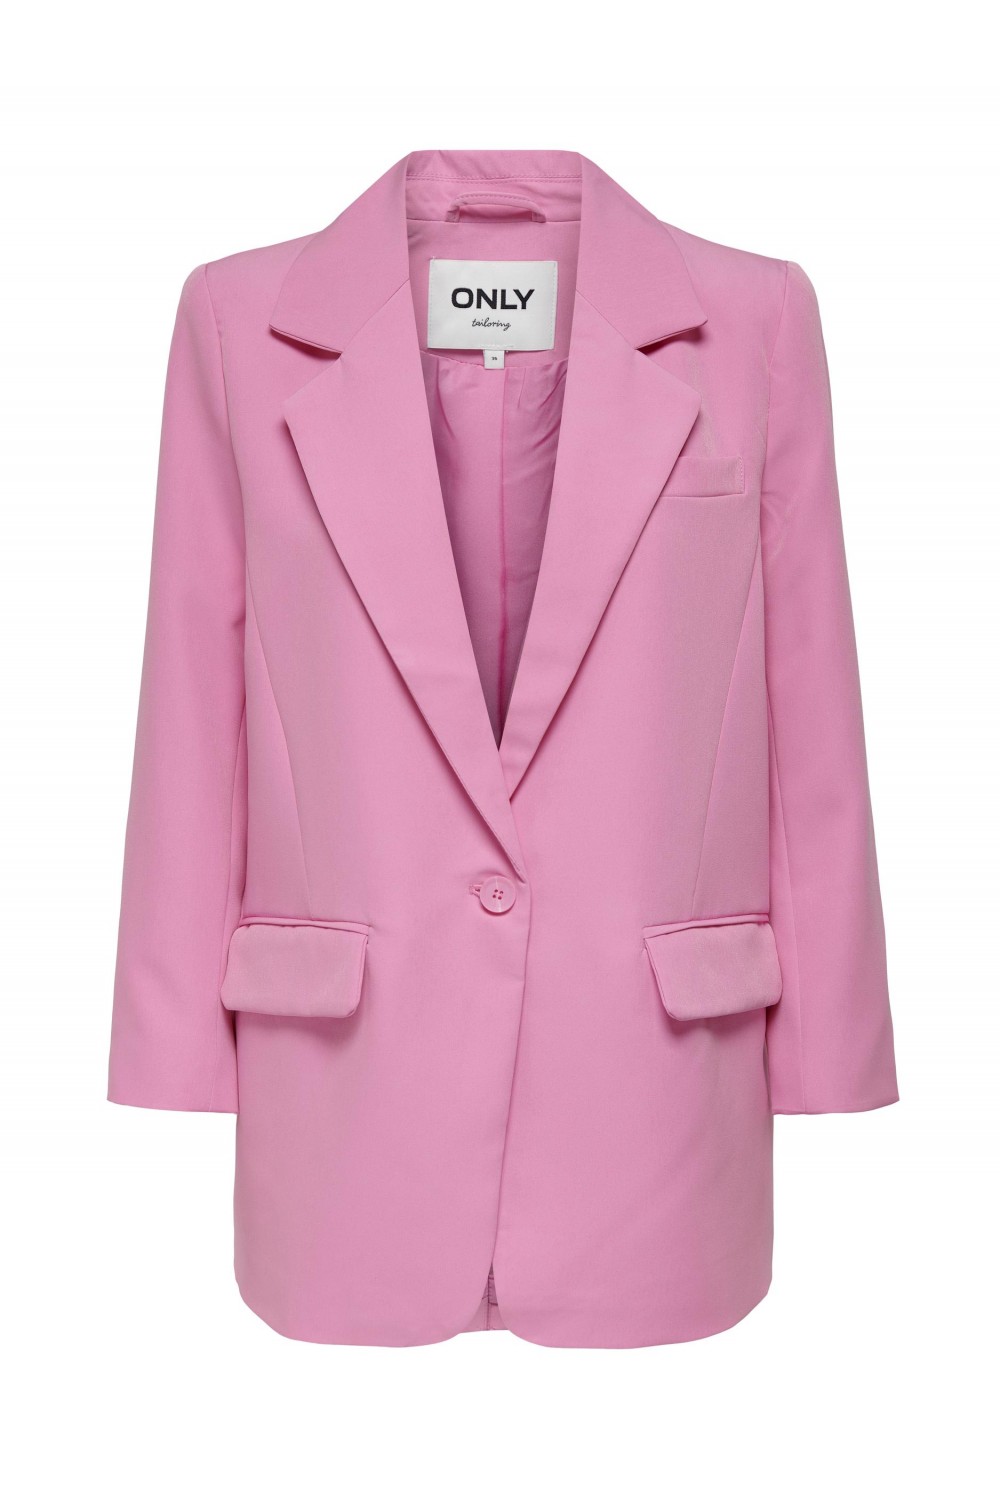 ONLY LANA-BERRY L/S OVS SUIT SET FUCHSIA PINK 15245698